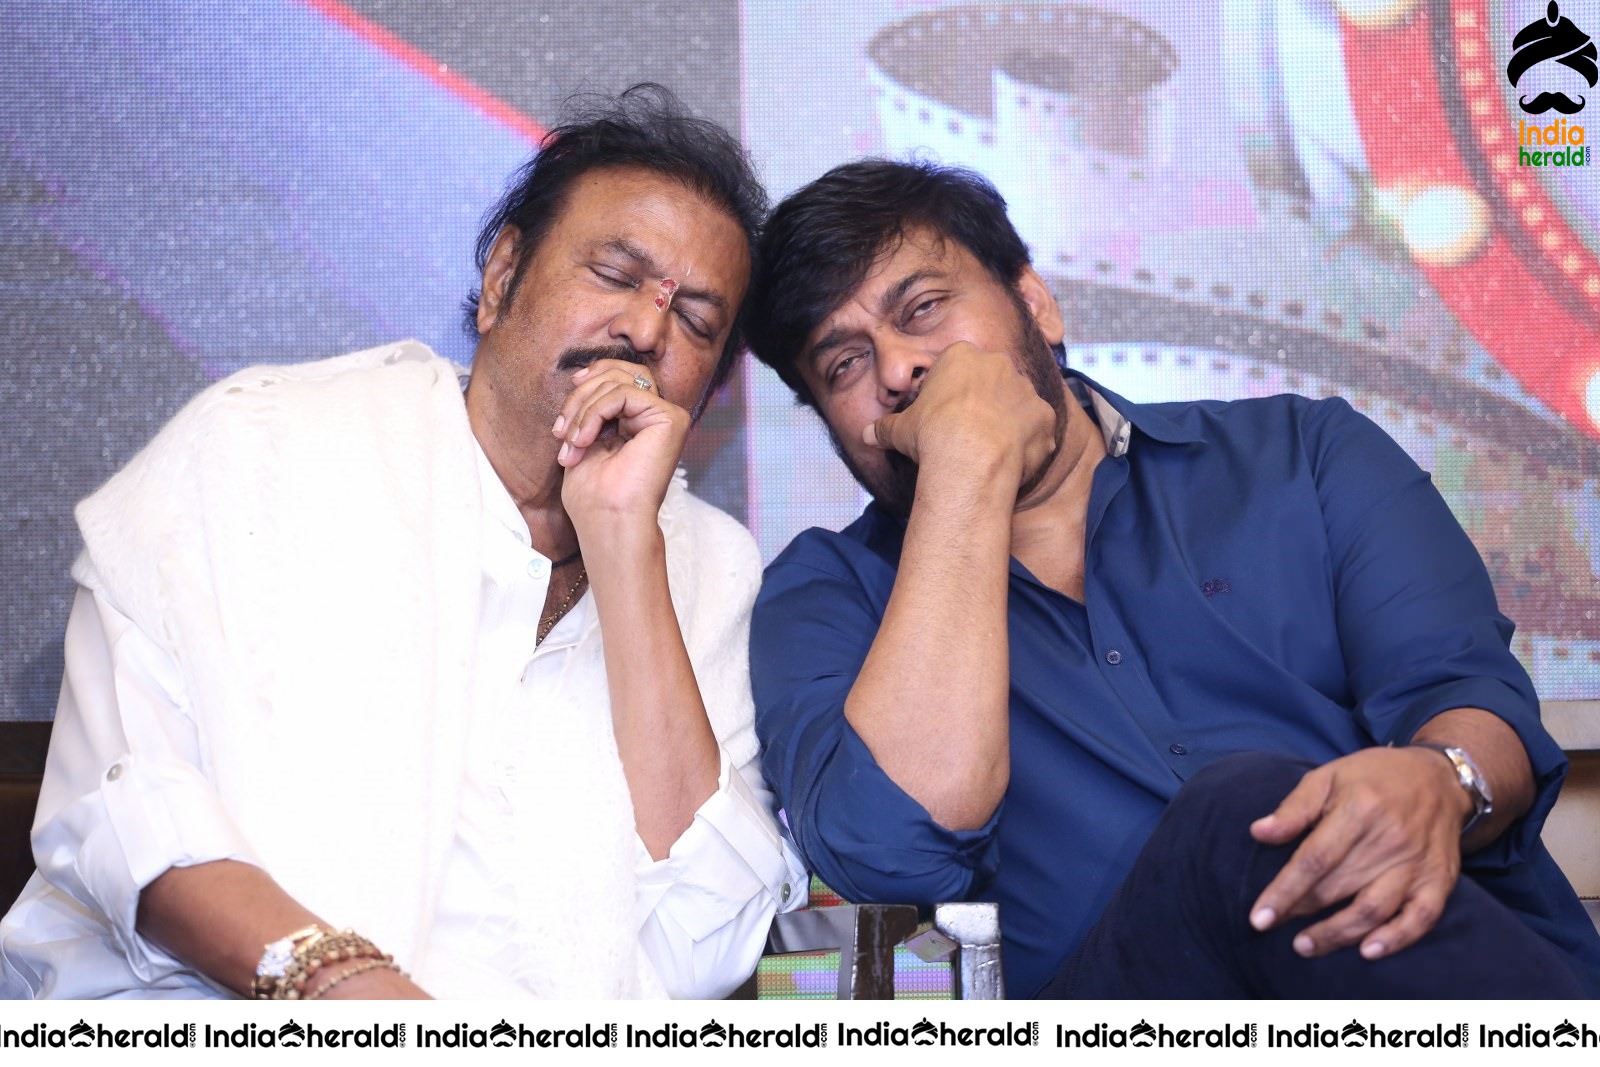 Some Candid Clicks of Actor Chiranjeevi during MAA 2020 launch Set 2